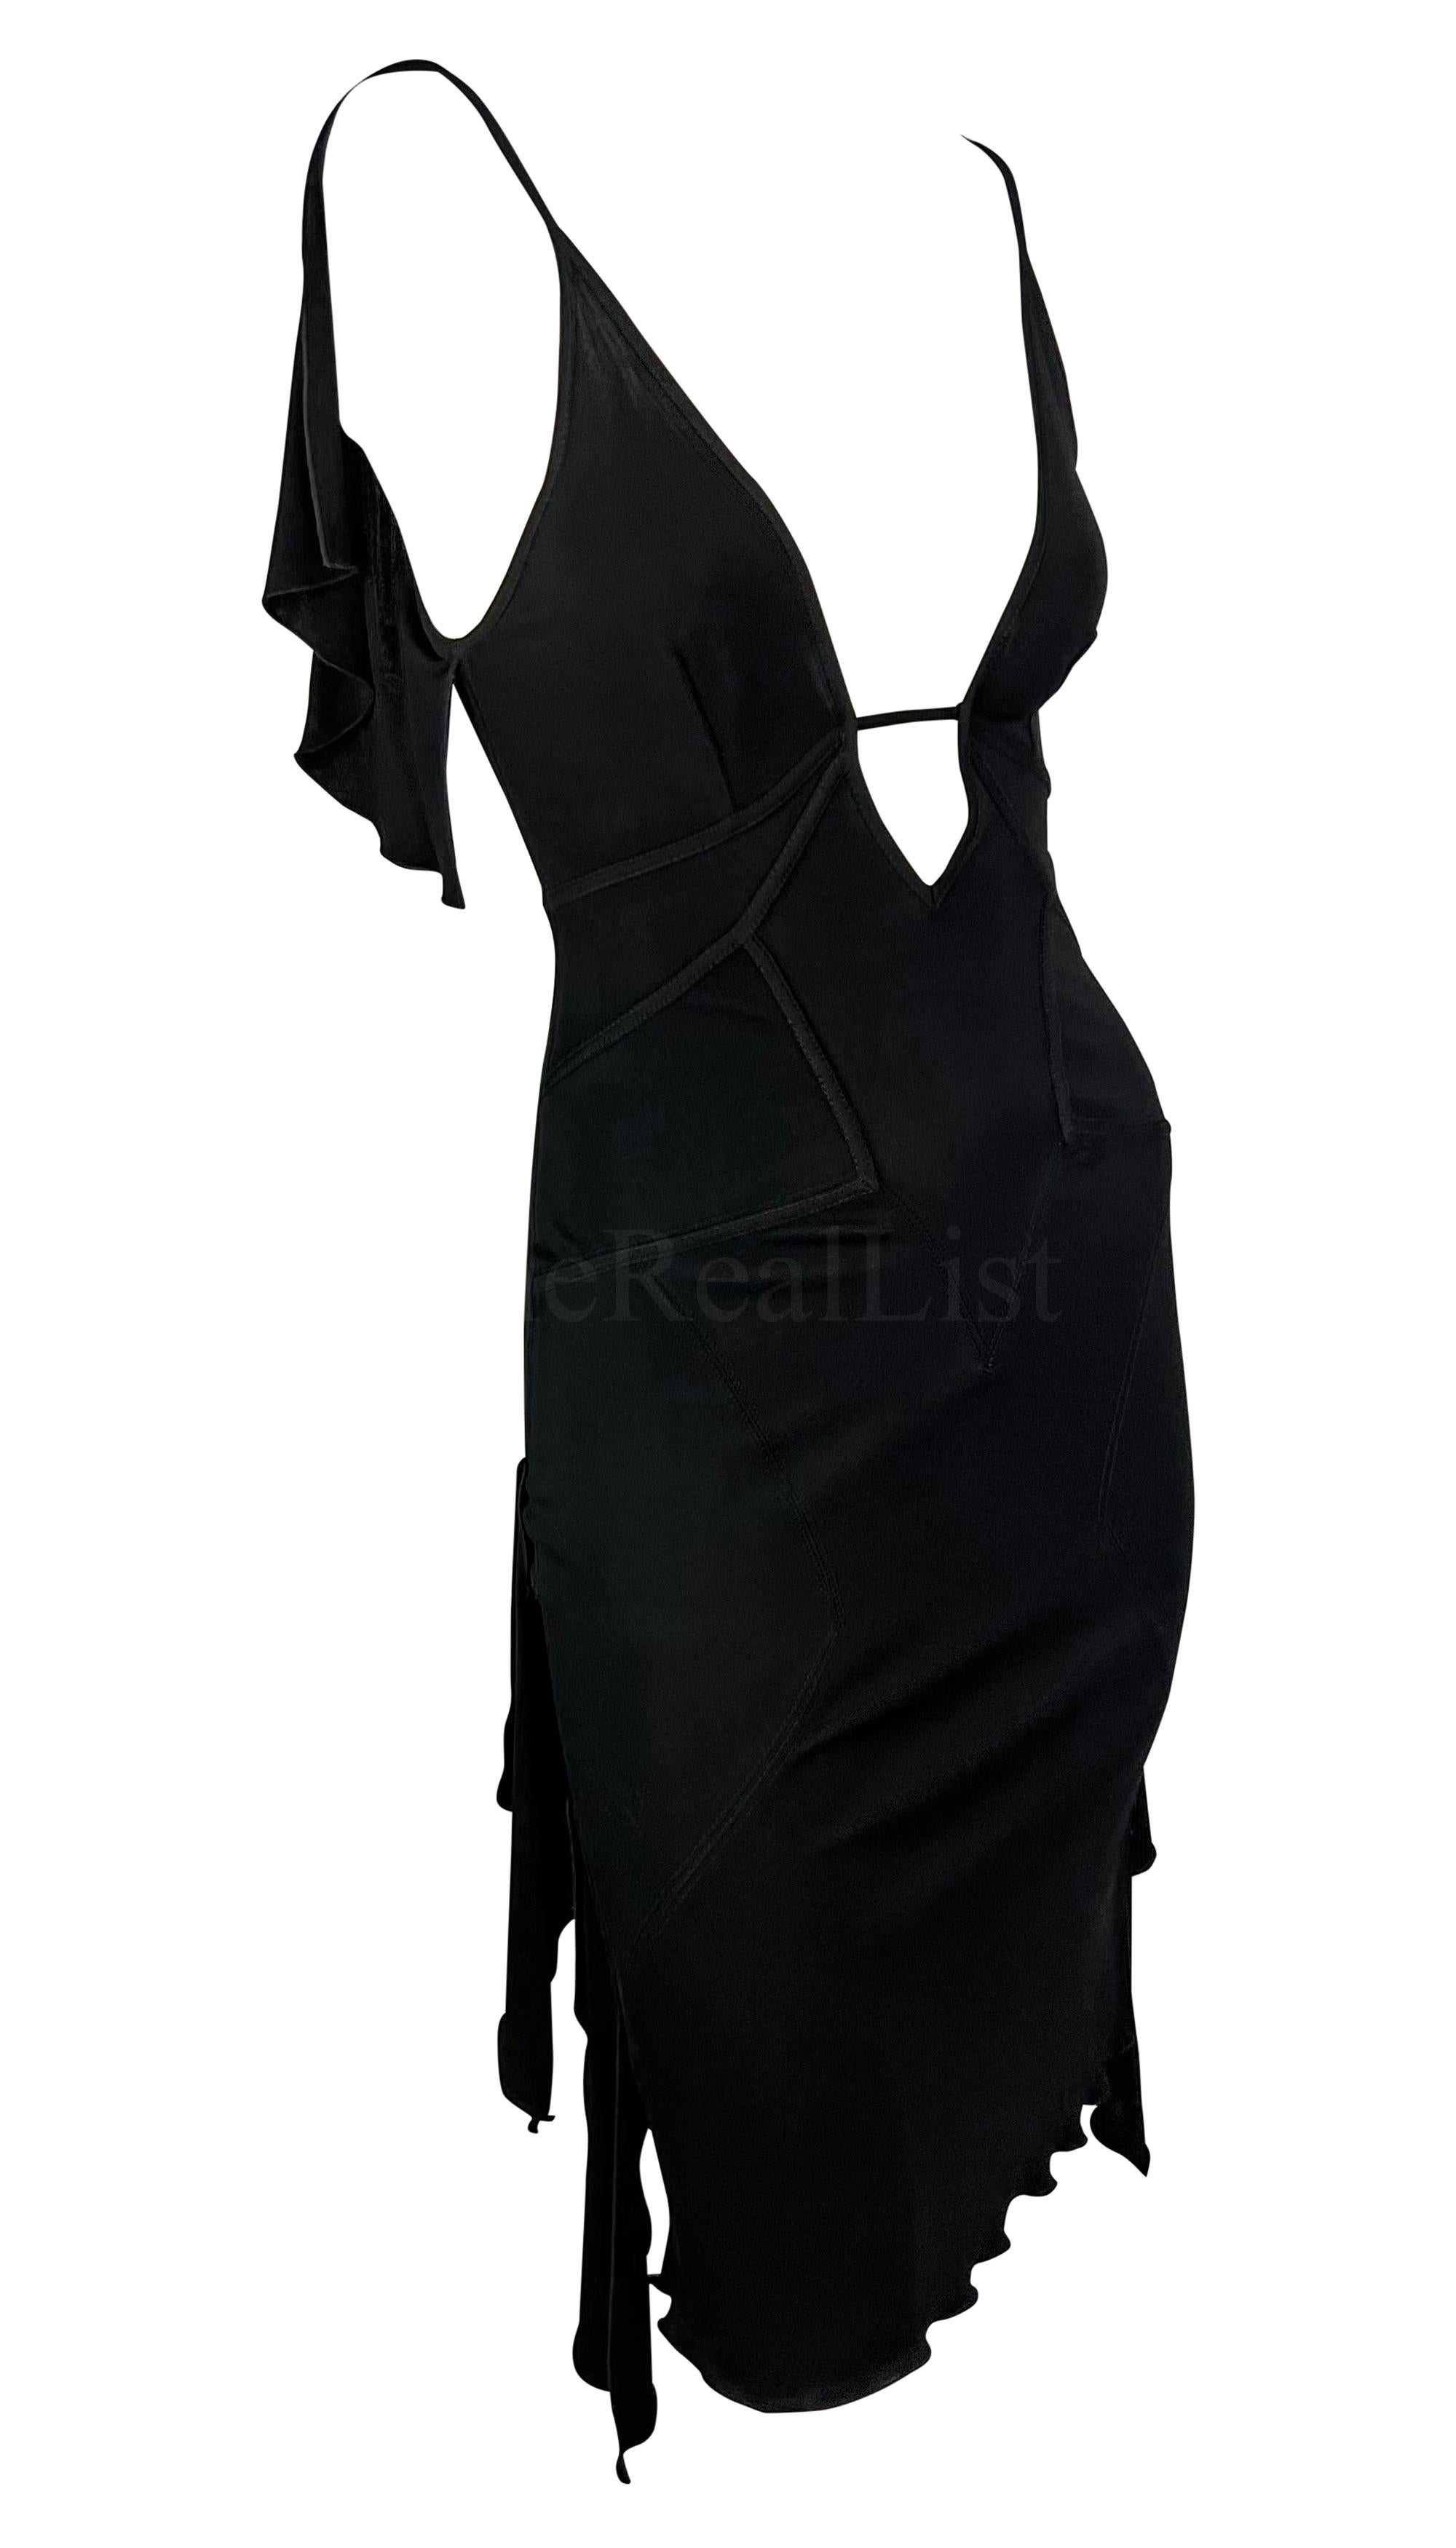 2003 Gucci by Tom Ford Black Plunge Ruffle Dress Sleeveless For Sale 3